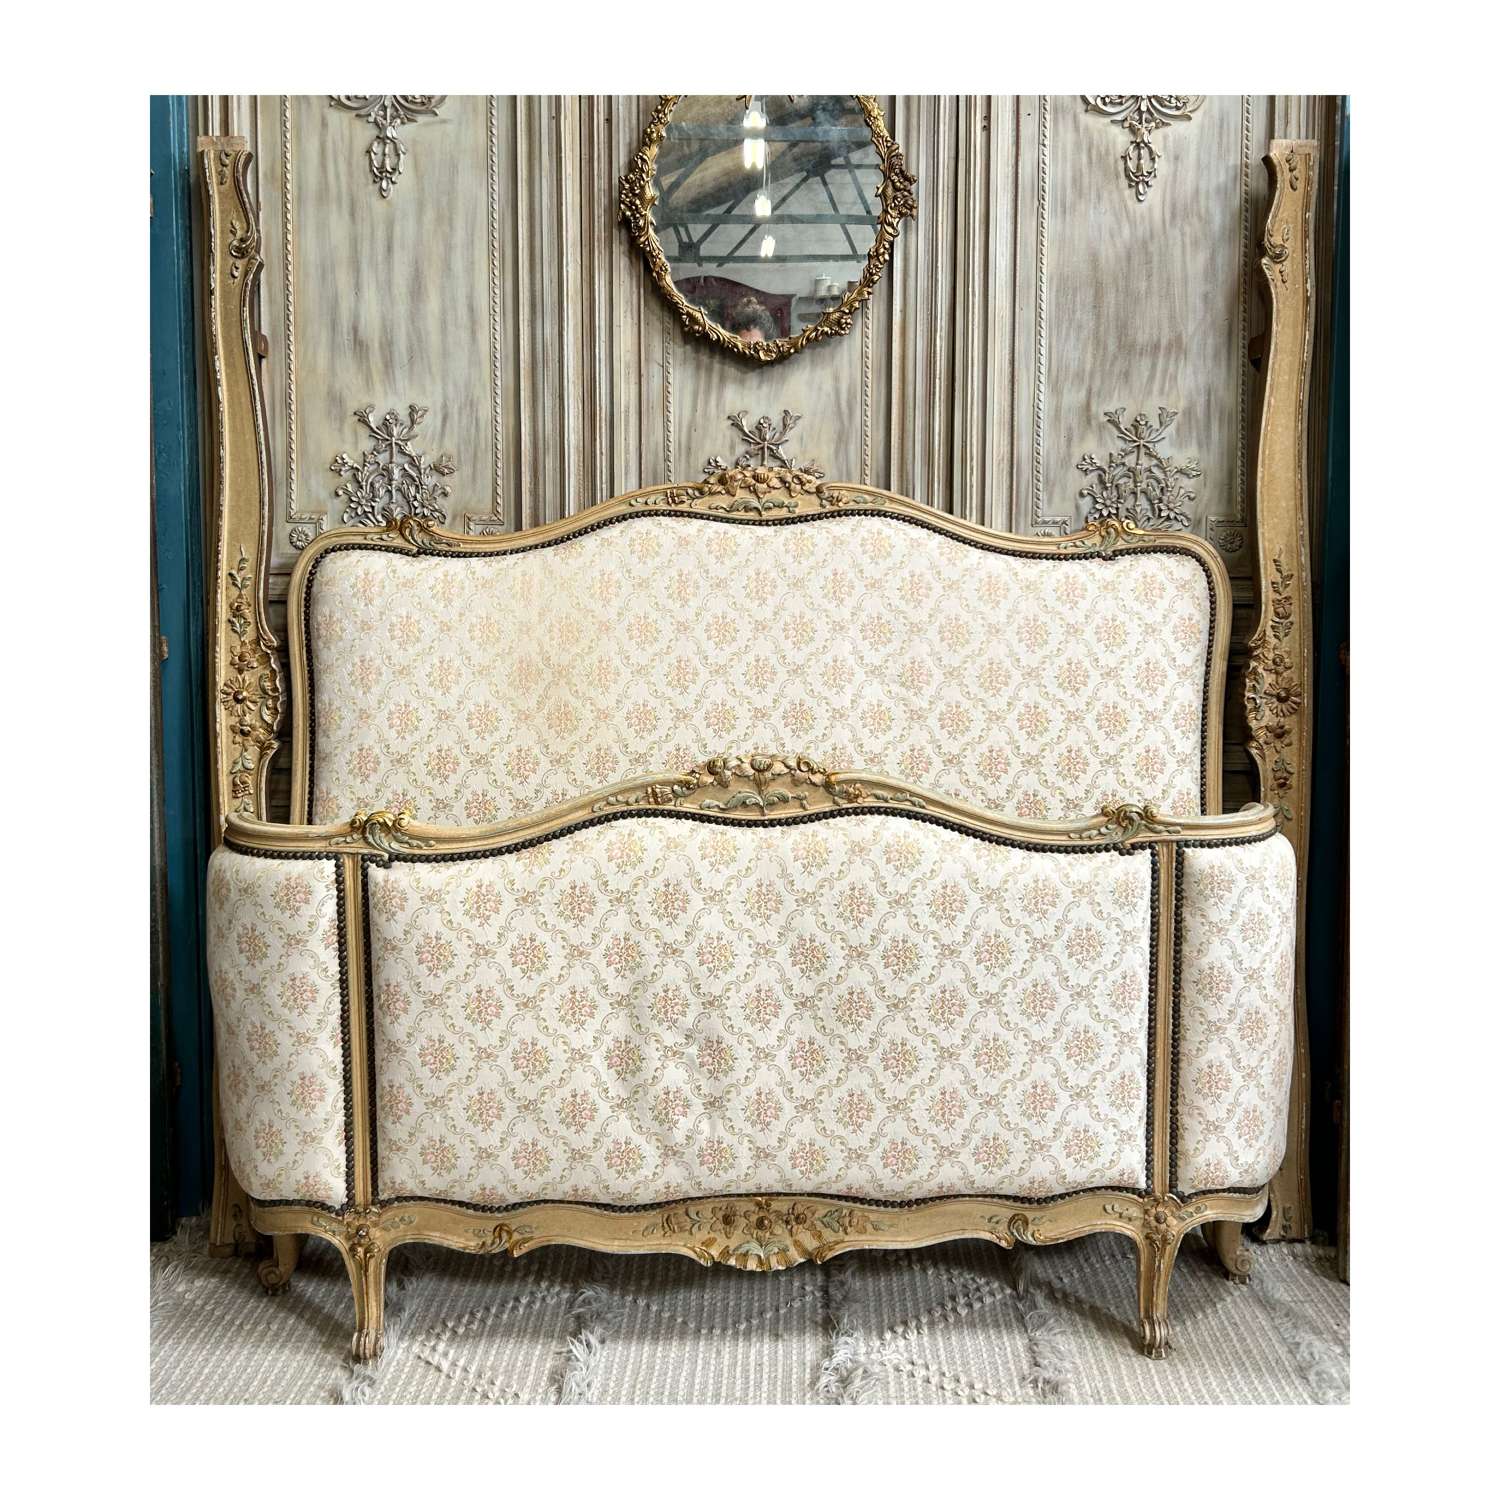 Antique French Corbeille Double Bed c1900-1920